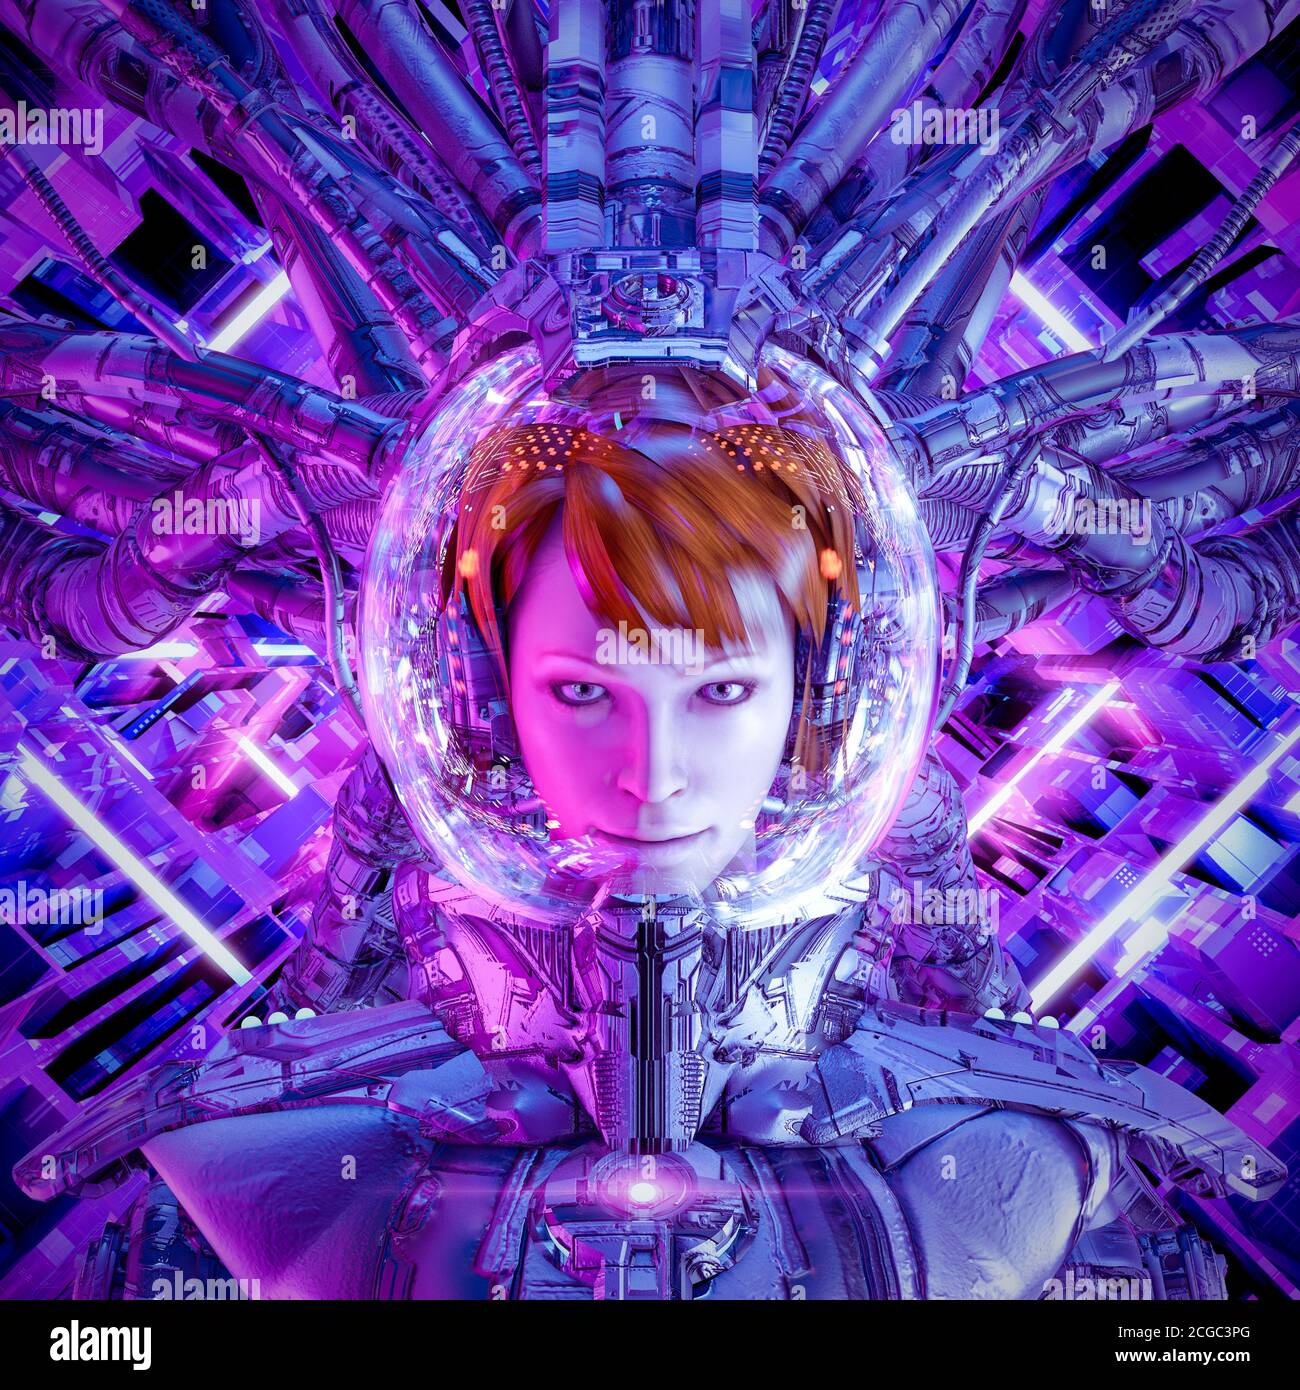 Mission to infinity / 3D illustration of science fiction female futuristic astronaut inside brightly neon lit space ship Stock Photo